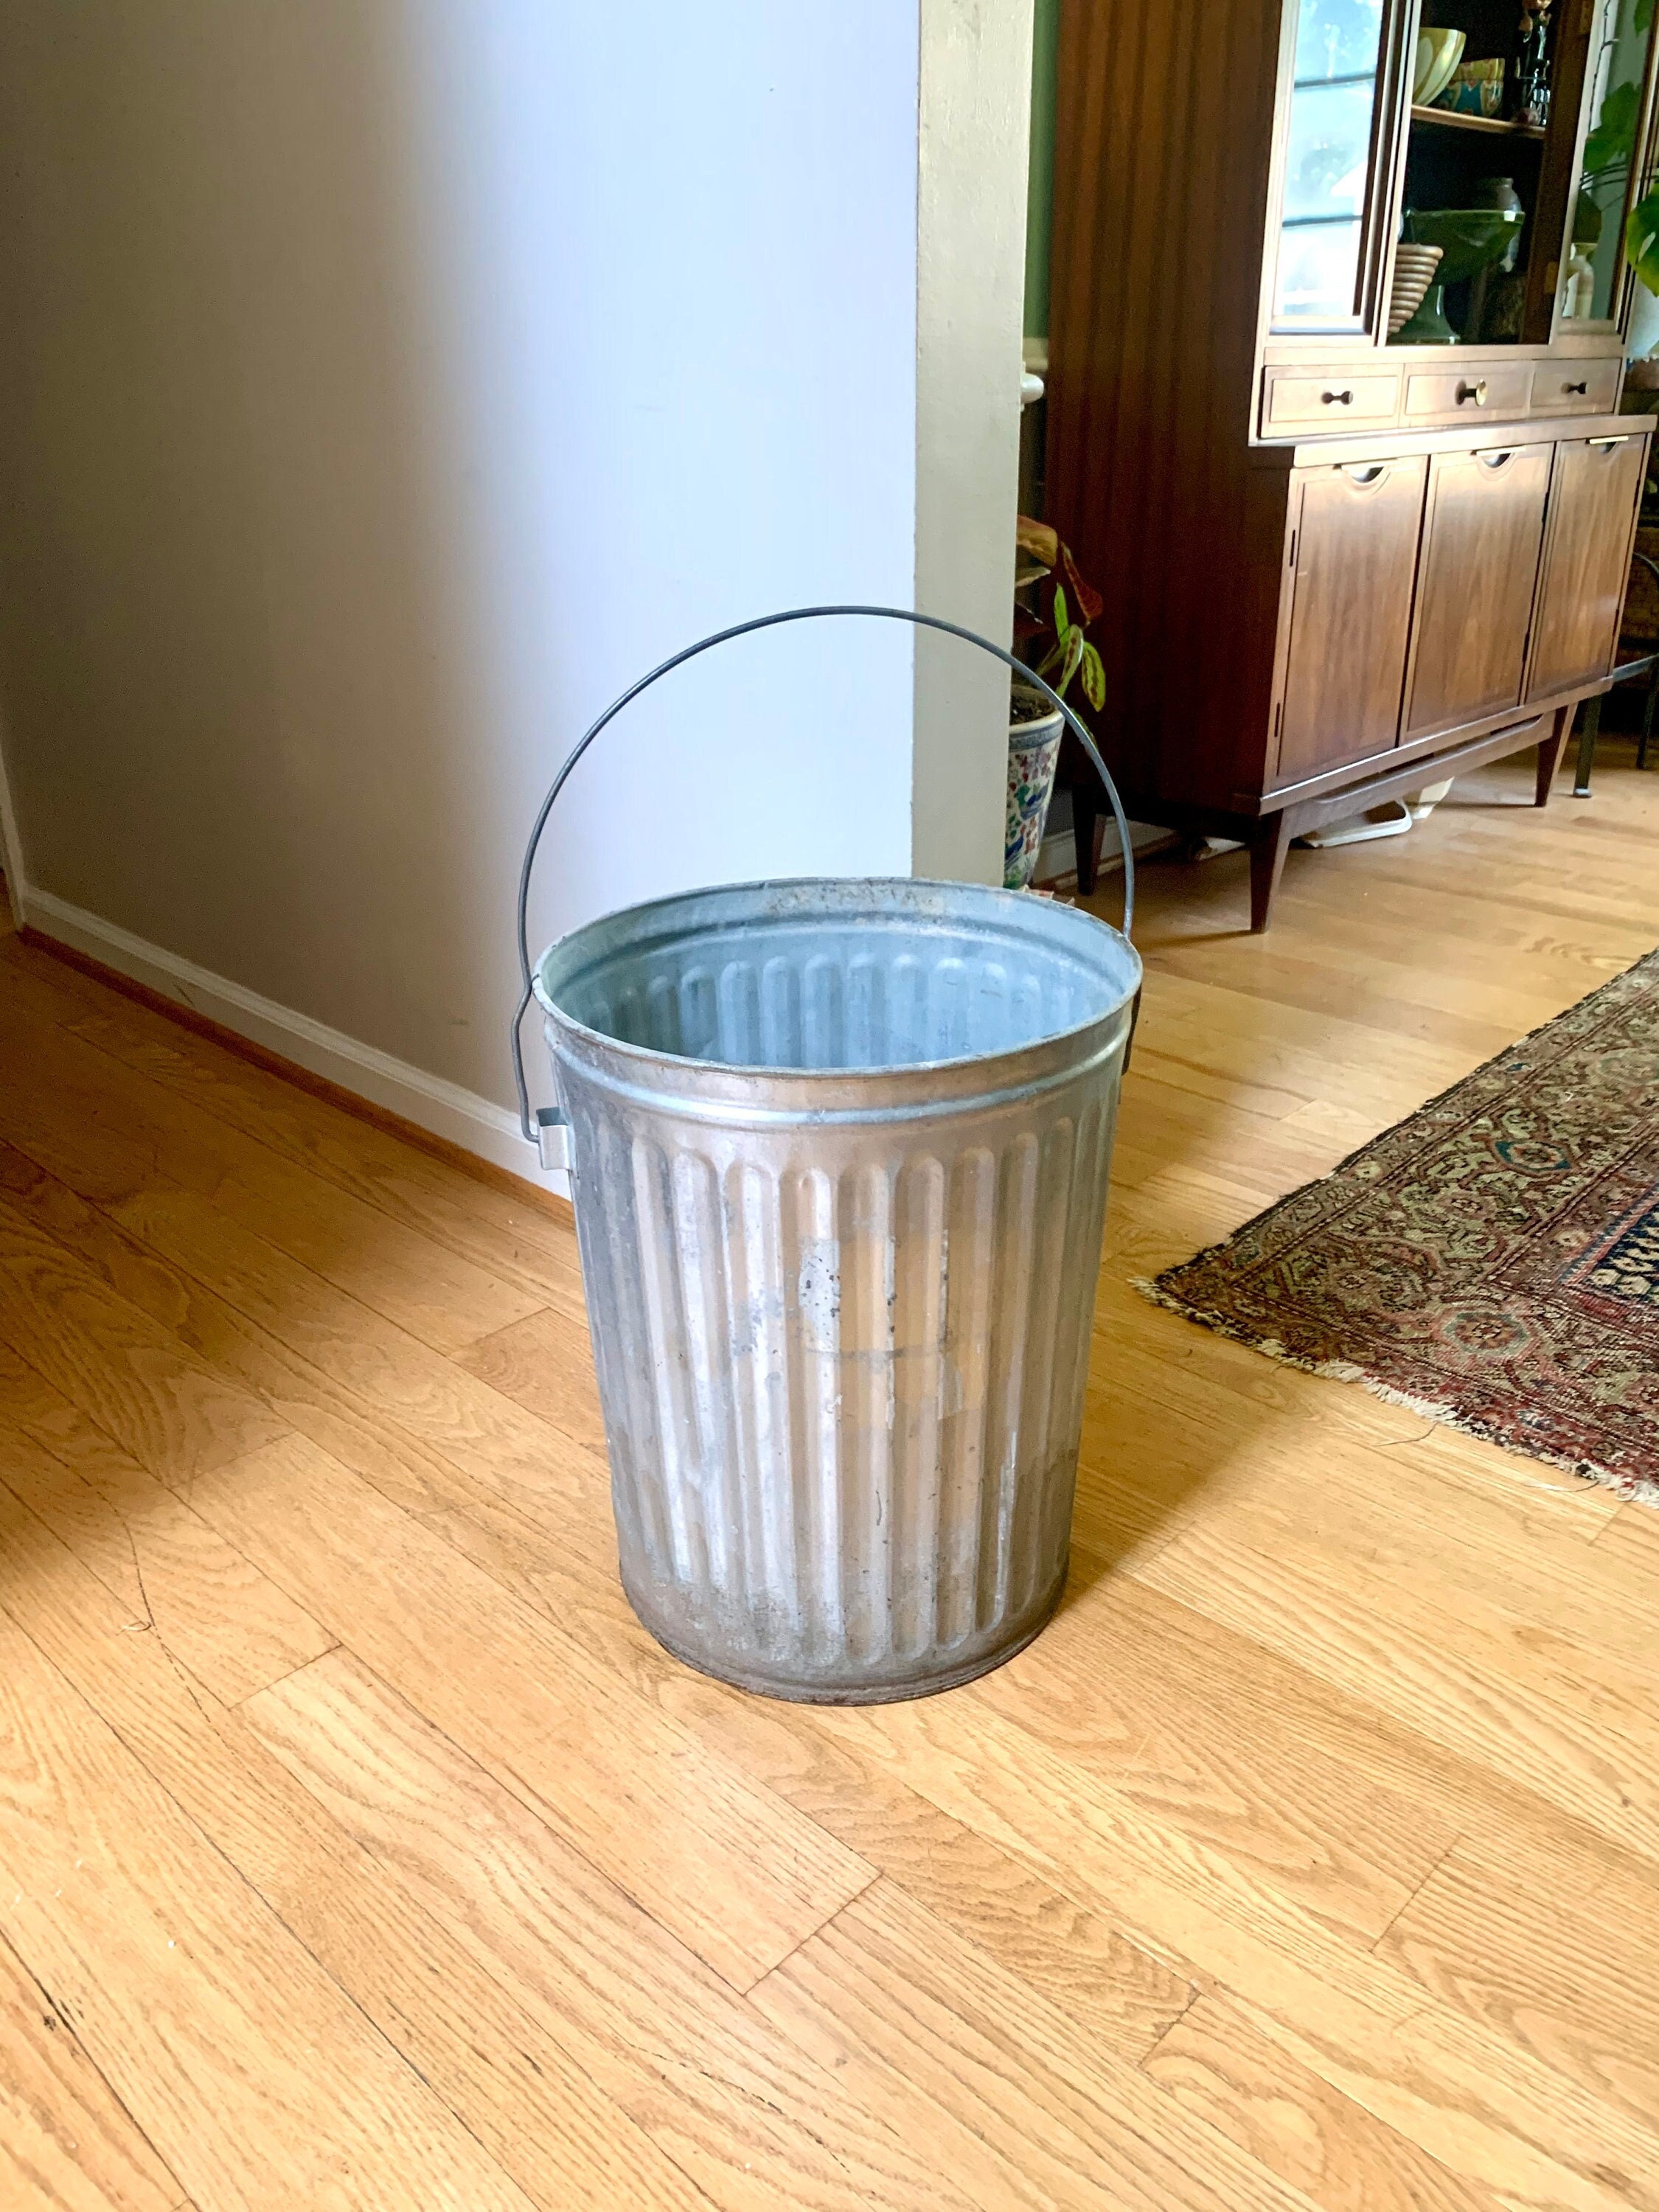 VINTAGE Trash Can WHEELING GALVANIZED METAL GARBAGE CAN WITH LID INDUSTRIAL